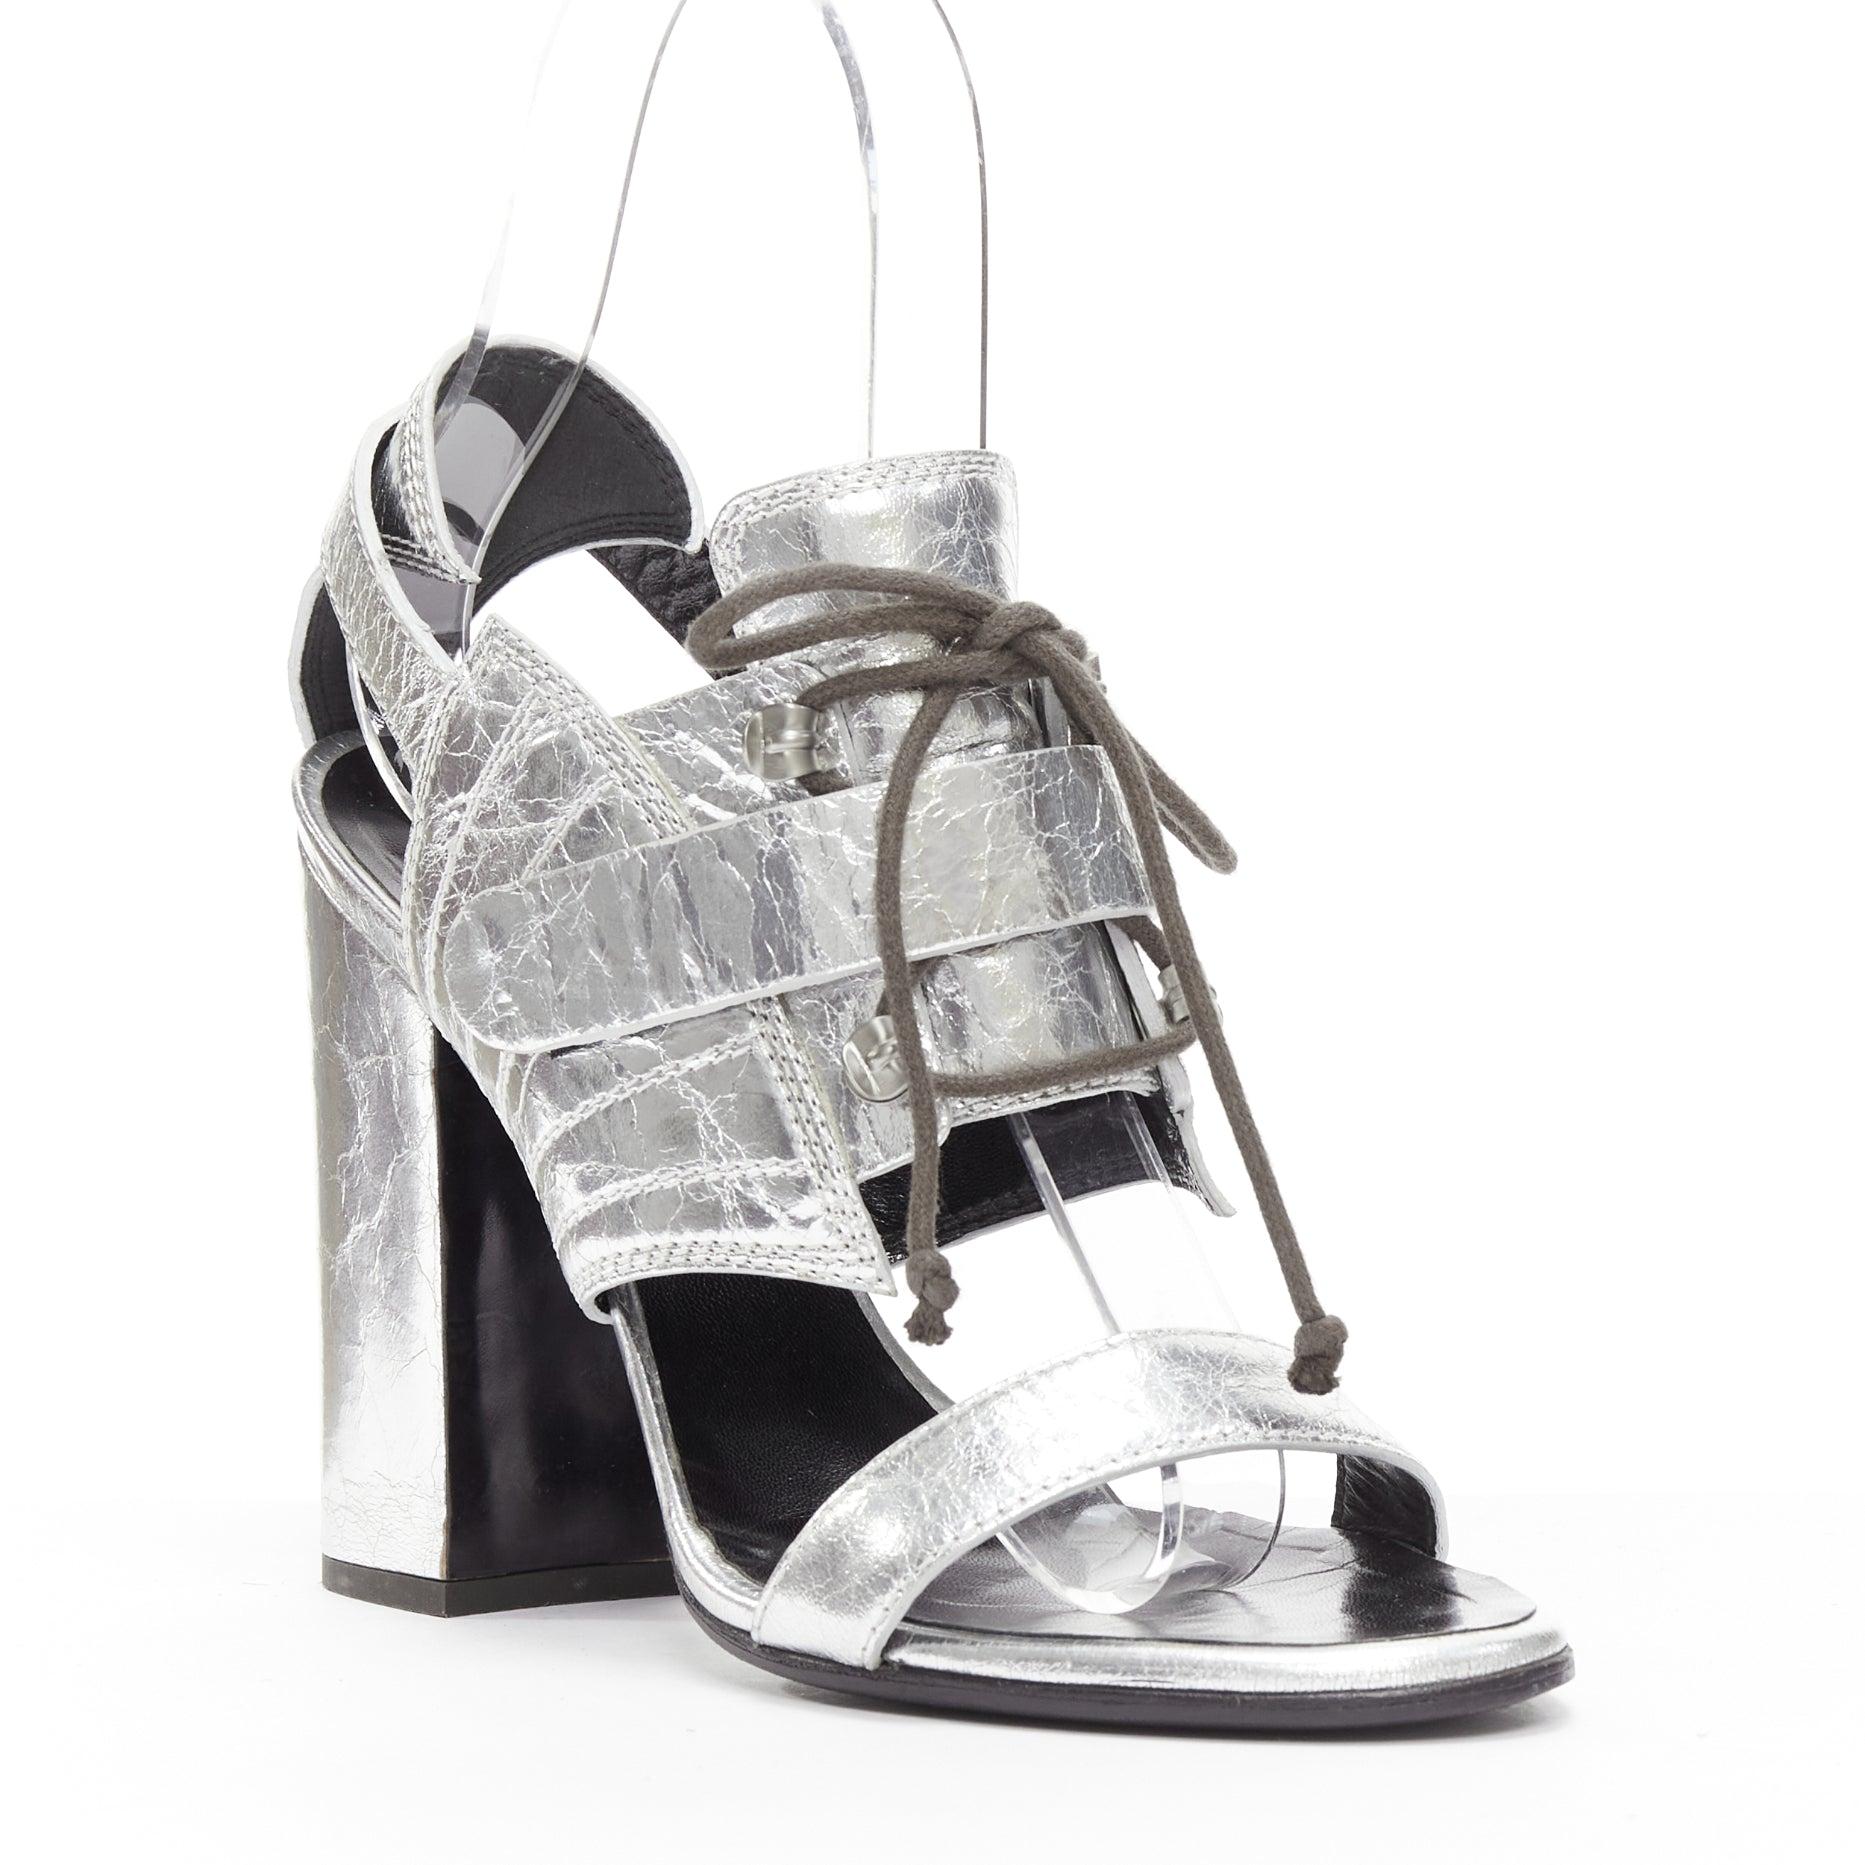 PROENZA SCHOULDER crinkled metallic silver leather laced block heel sandal EU37
Reference: NKLL/A00132
Brand: Proenza Schouler
Material: Leather
Color: Silver
Pattern: Solid
Closure: Lace Up
Lining: Black Leather
Extra Details: Laced and magic tape